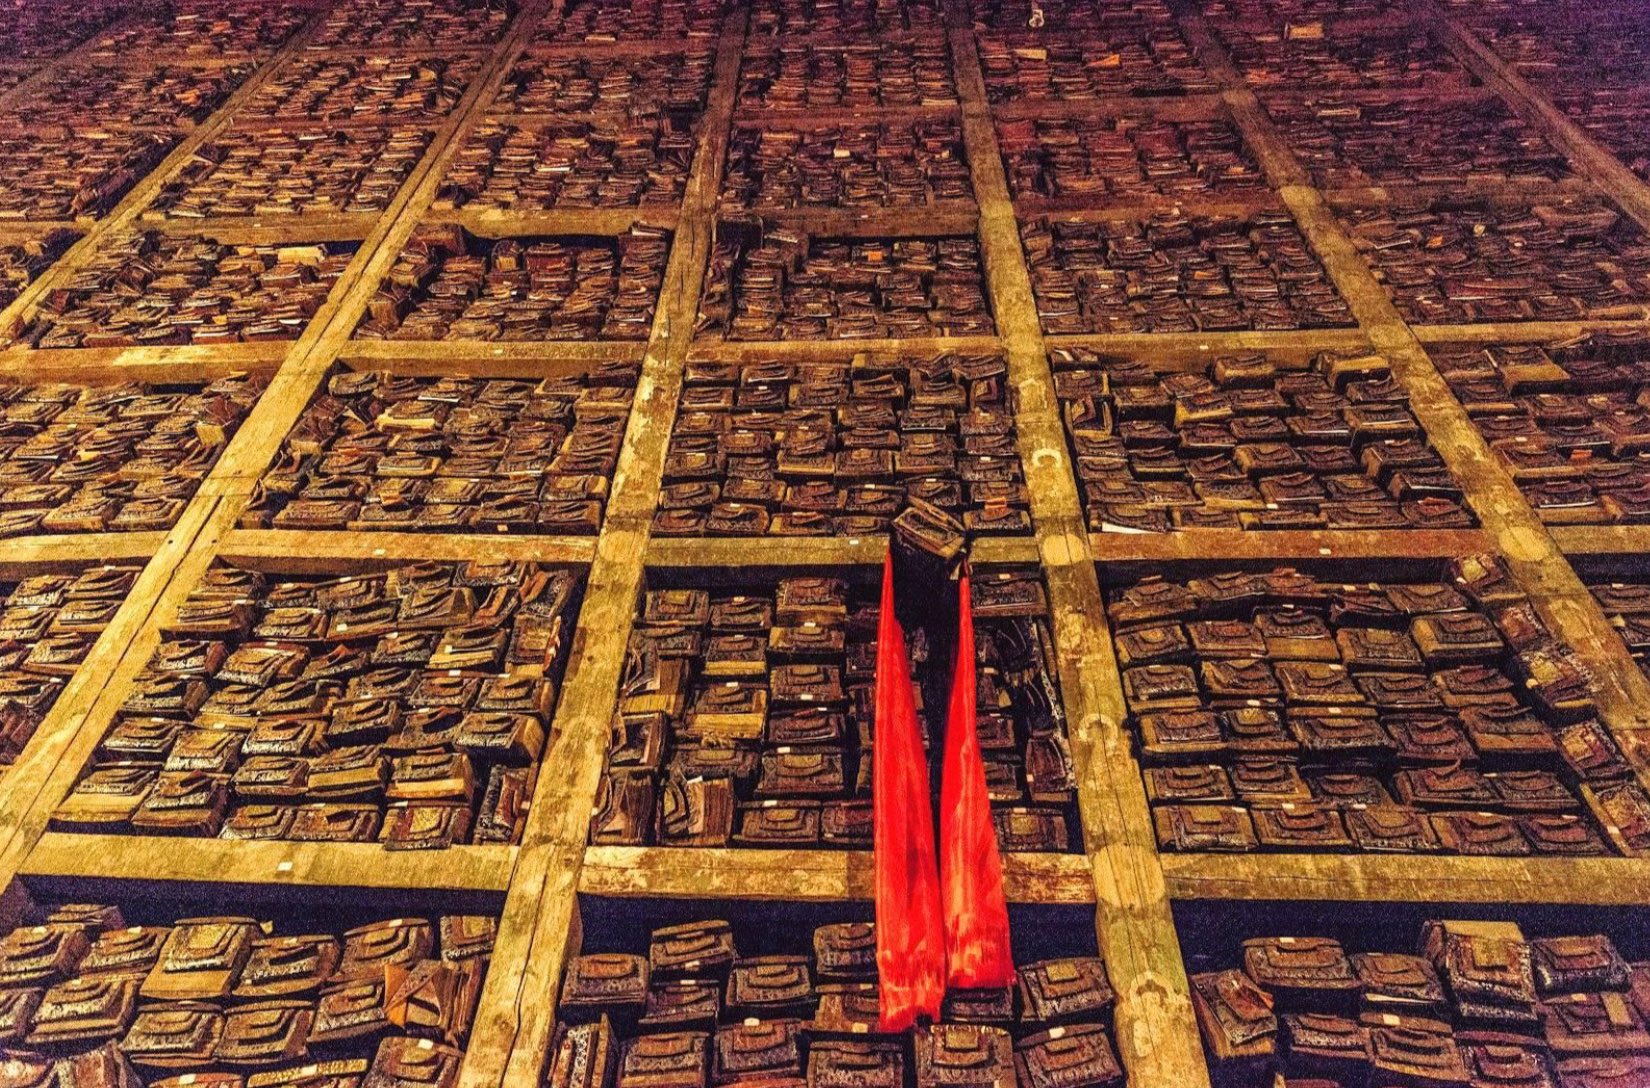 Whispers Through Time - 84,000 Secrets in the Sakya Monastery Library - Tibet